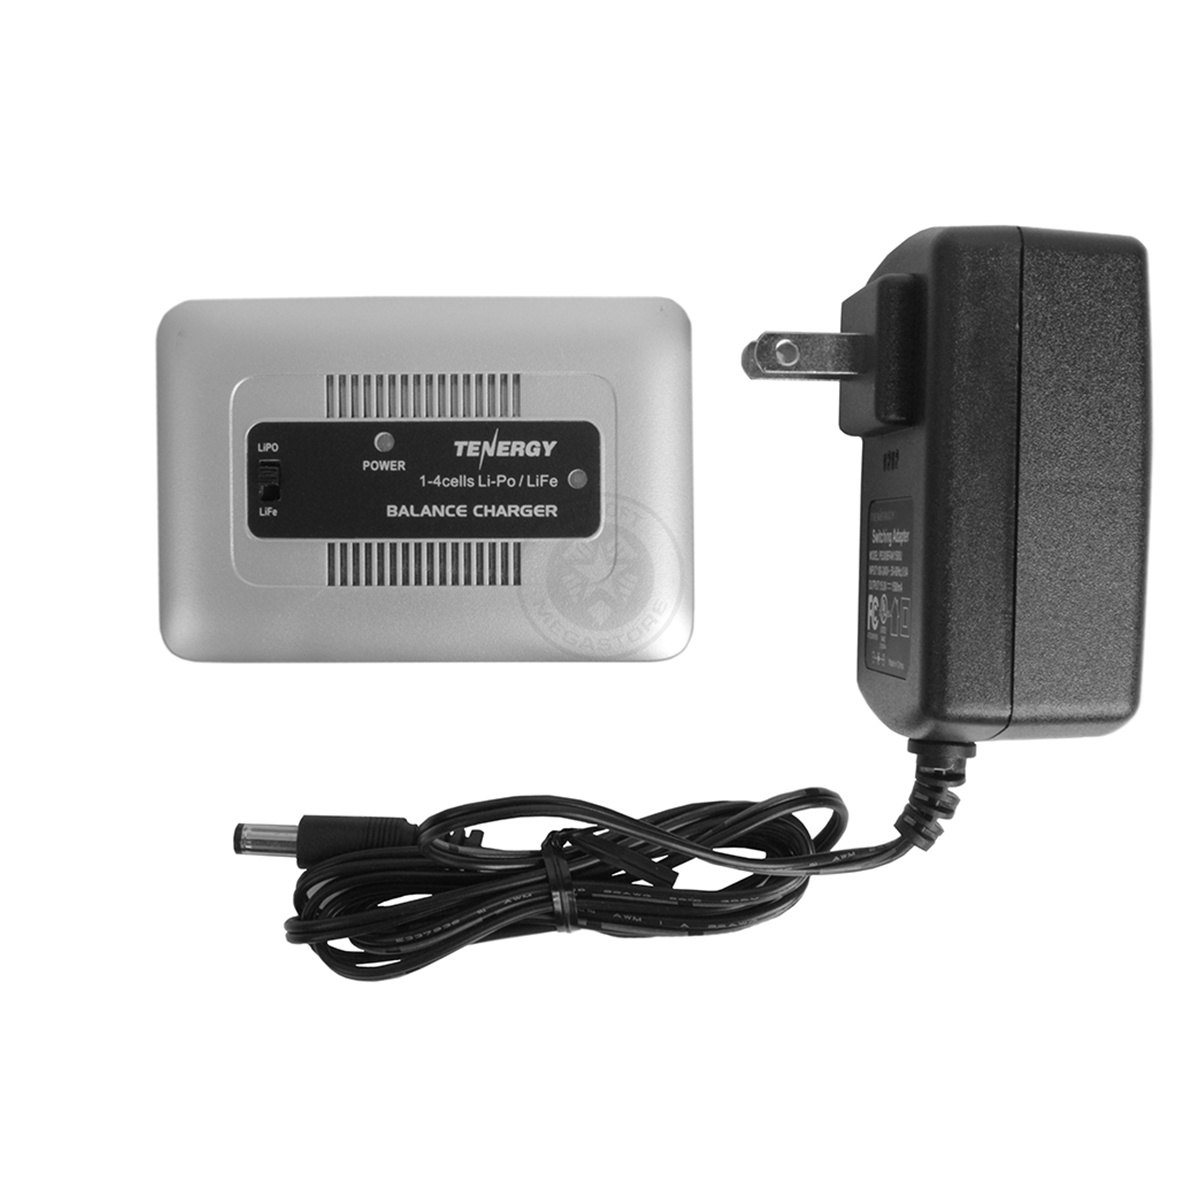  Tenergy Charger Adapter for Airsoft Gun Battery Pack